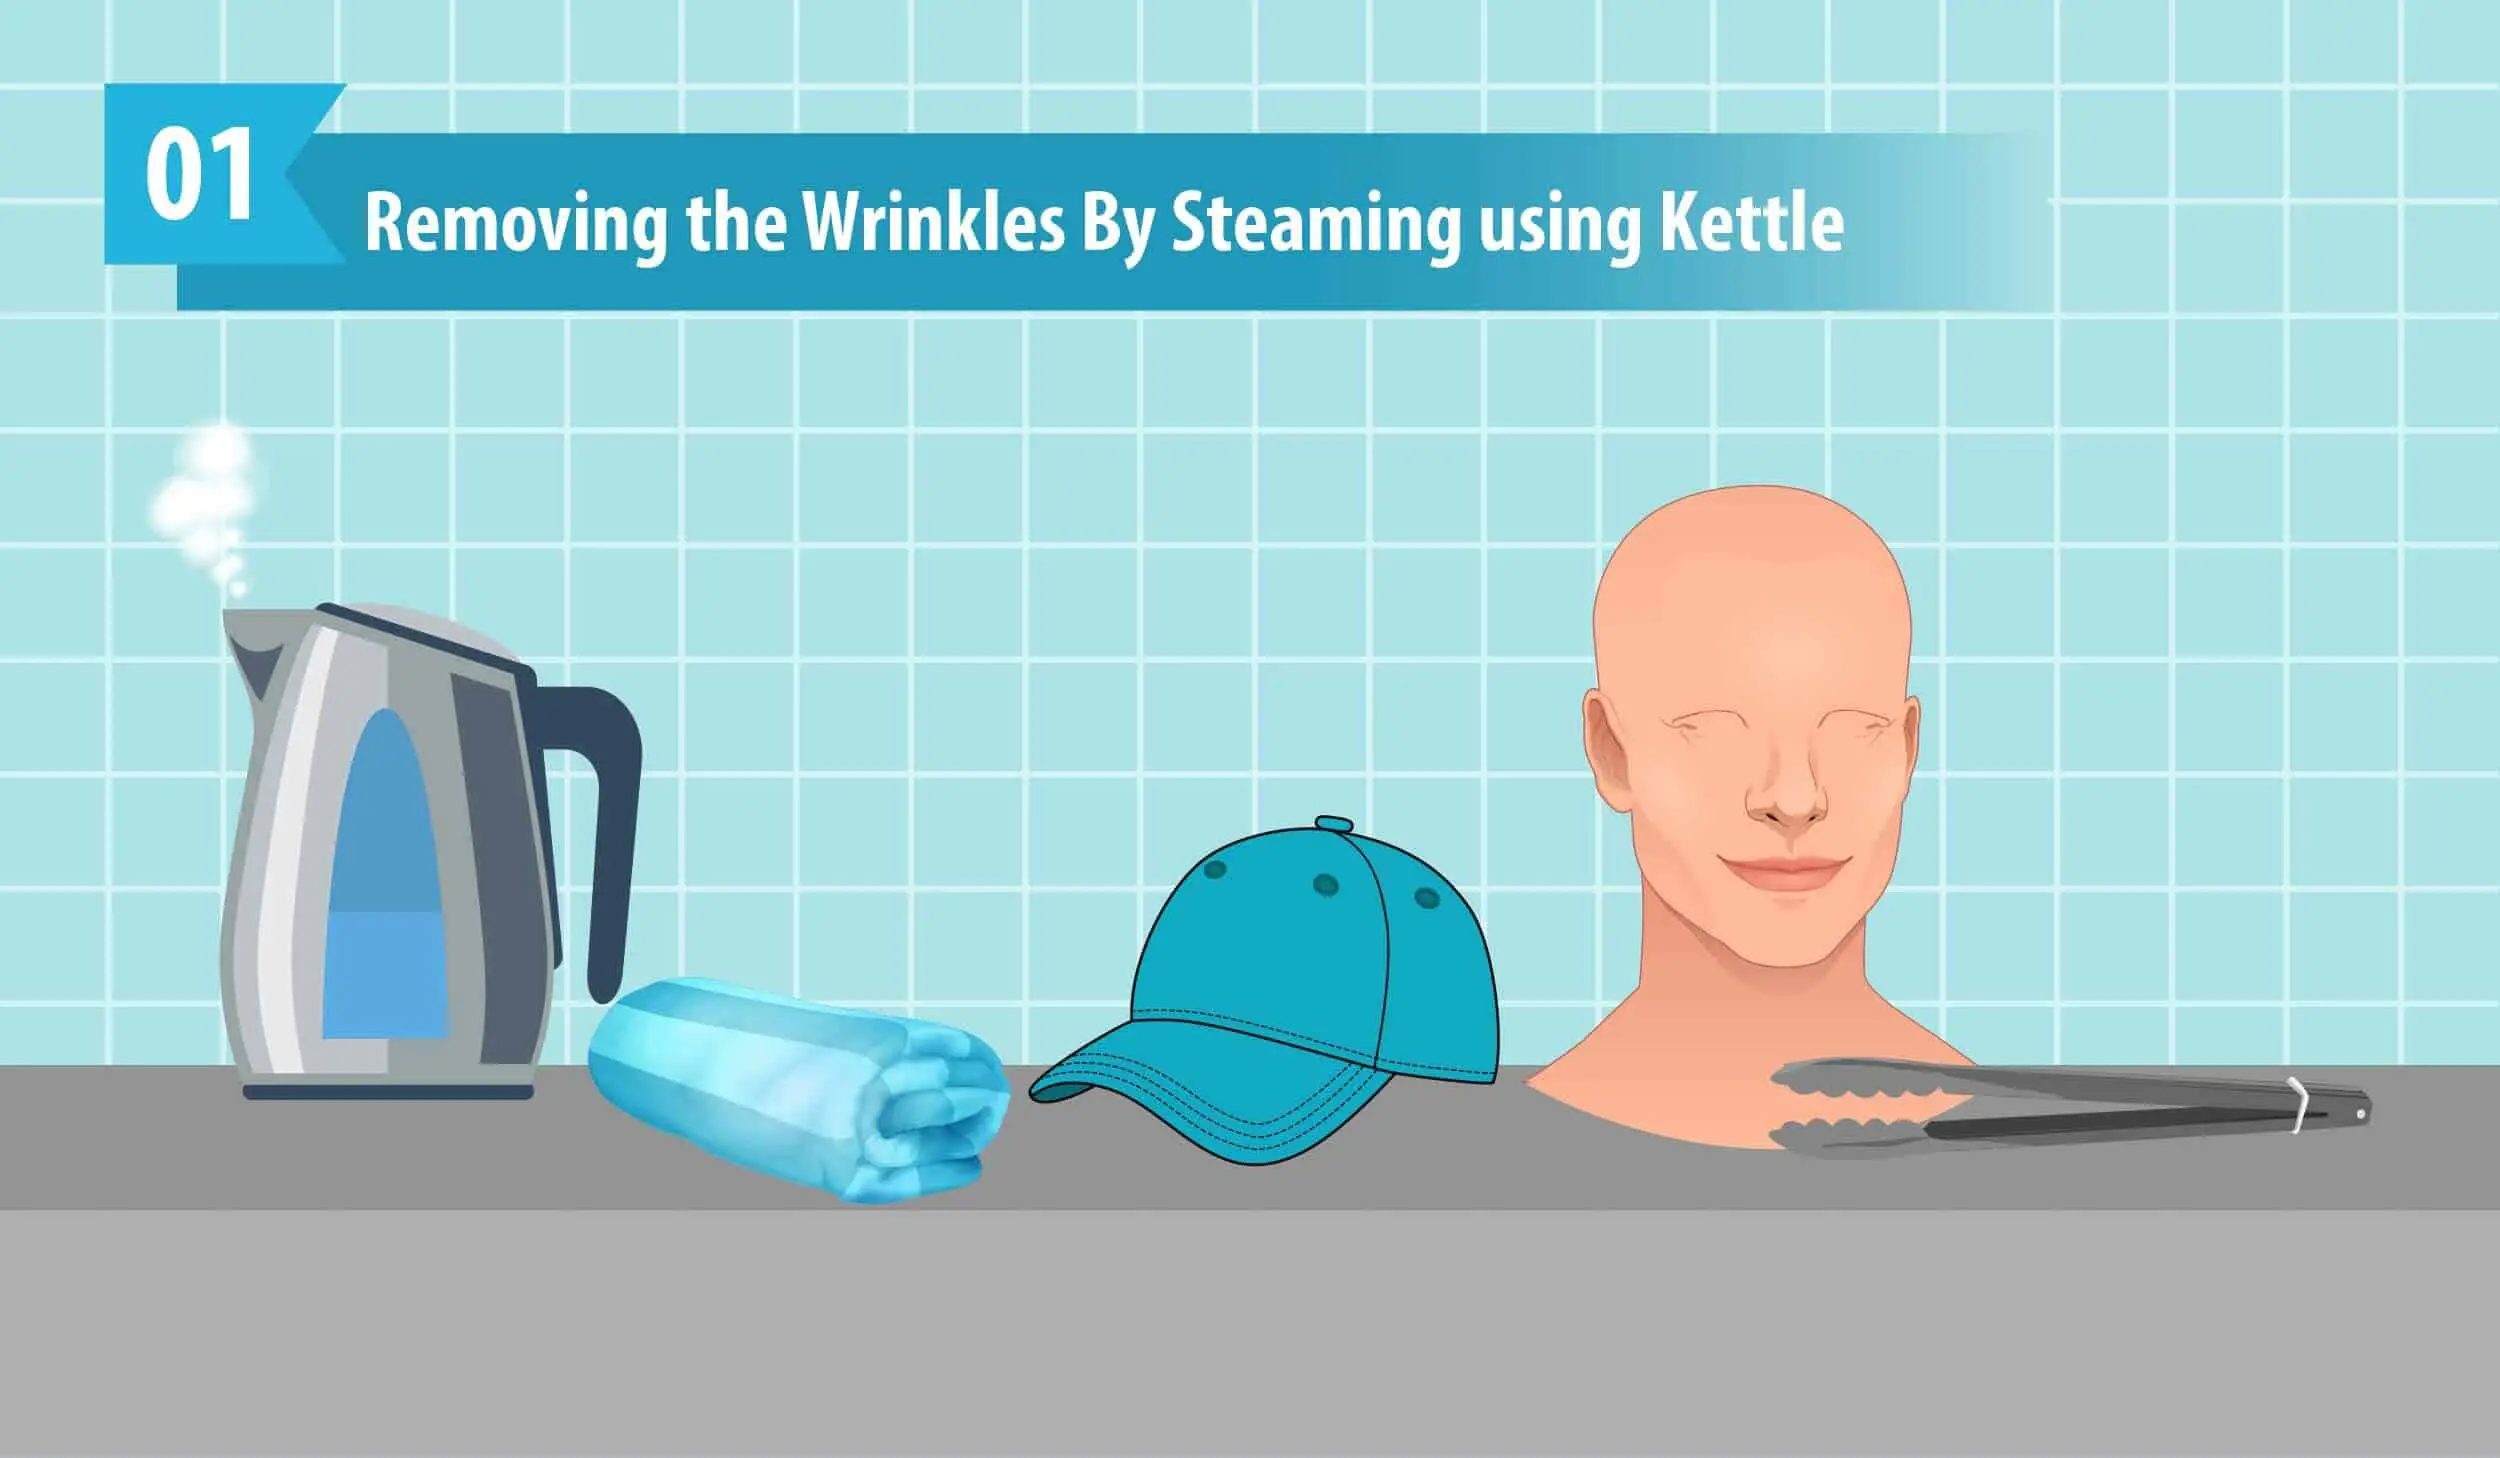 Removing the Wrinkles By Steaming using Kettle